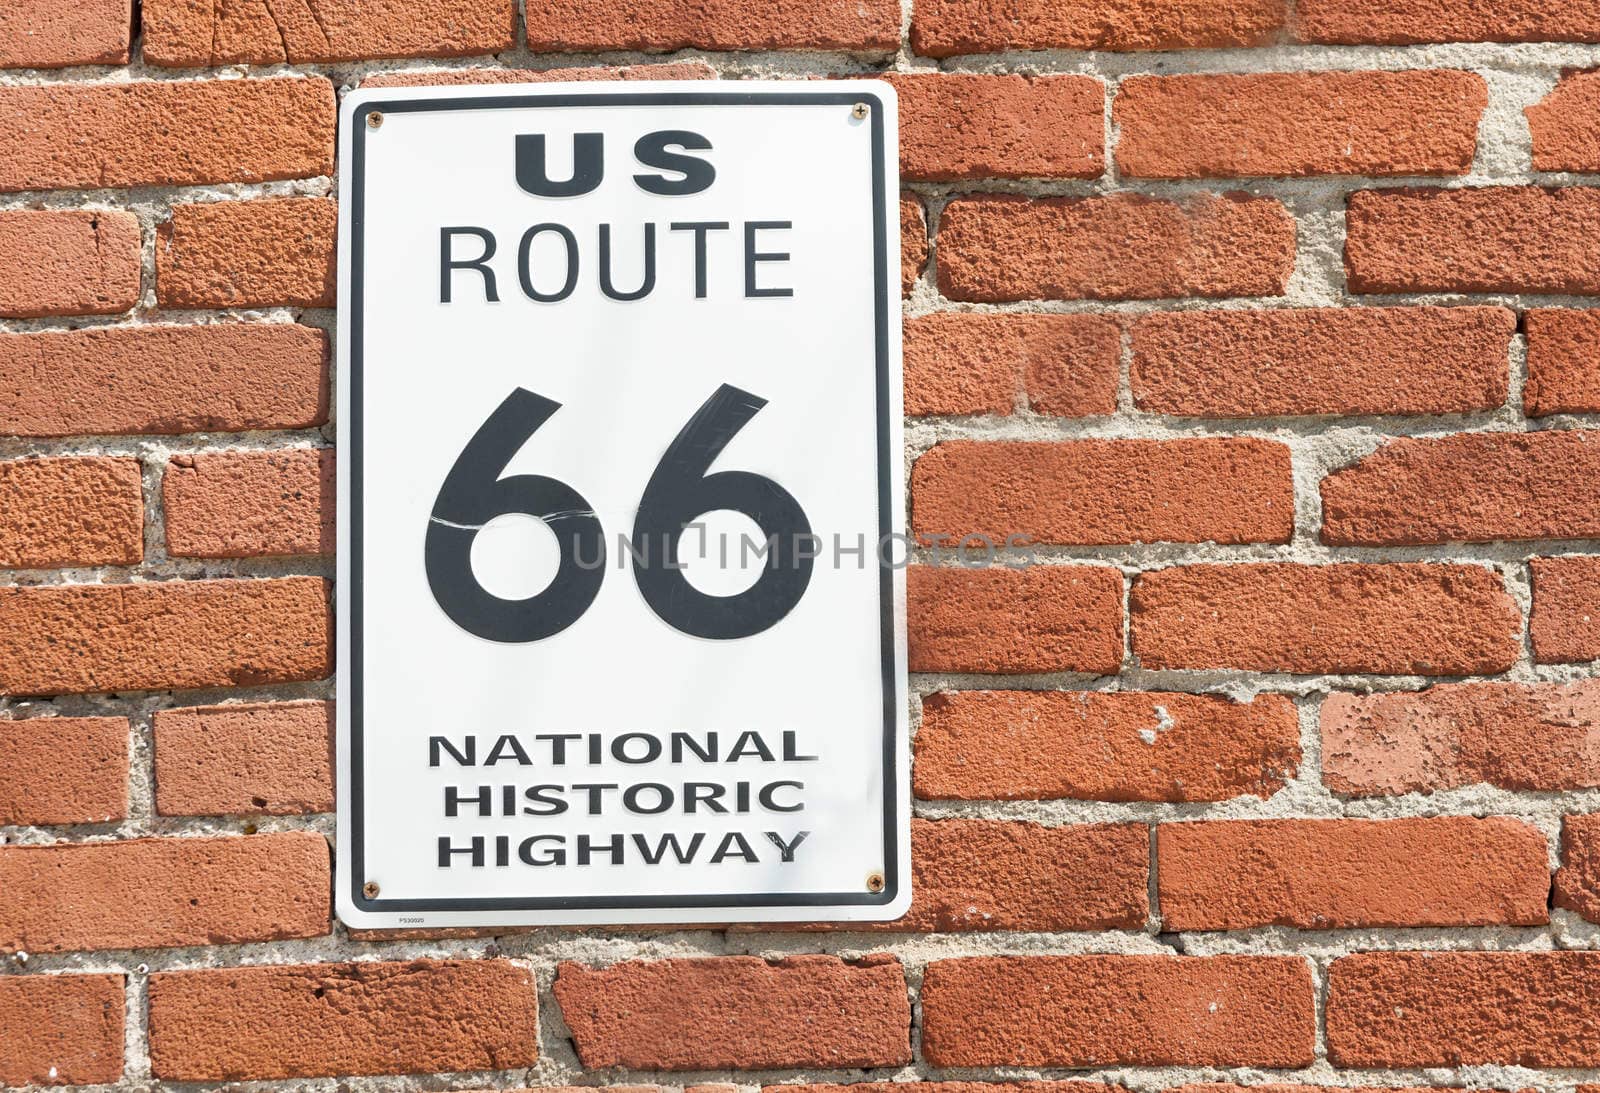 US Route 66 National Historic Highway sign on red brick wall by brians101